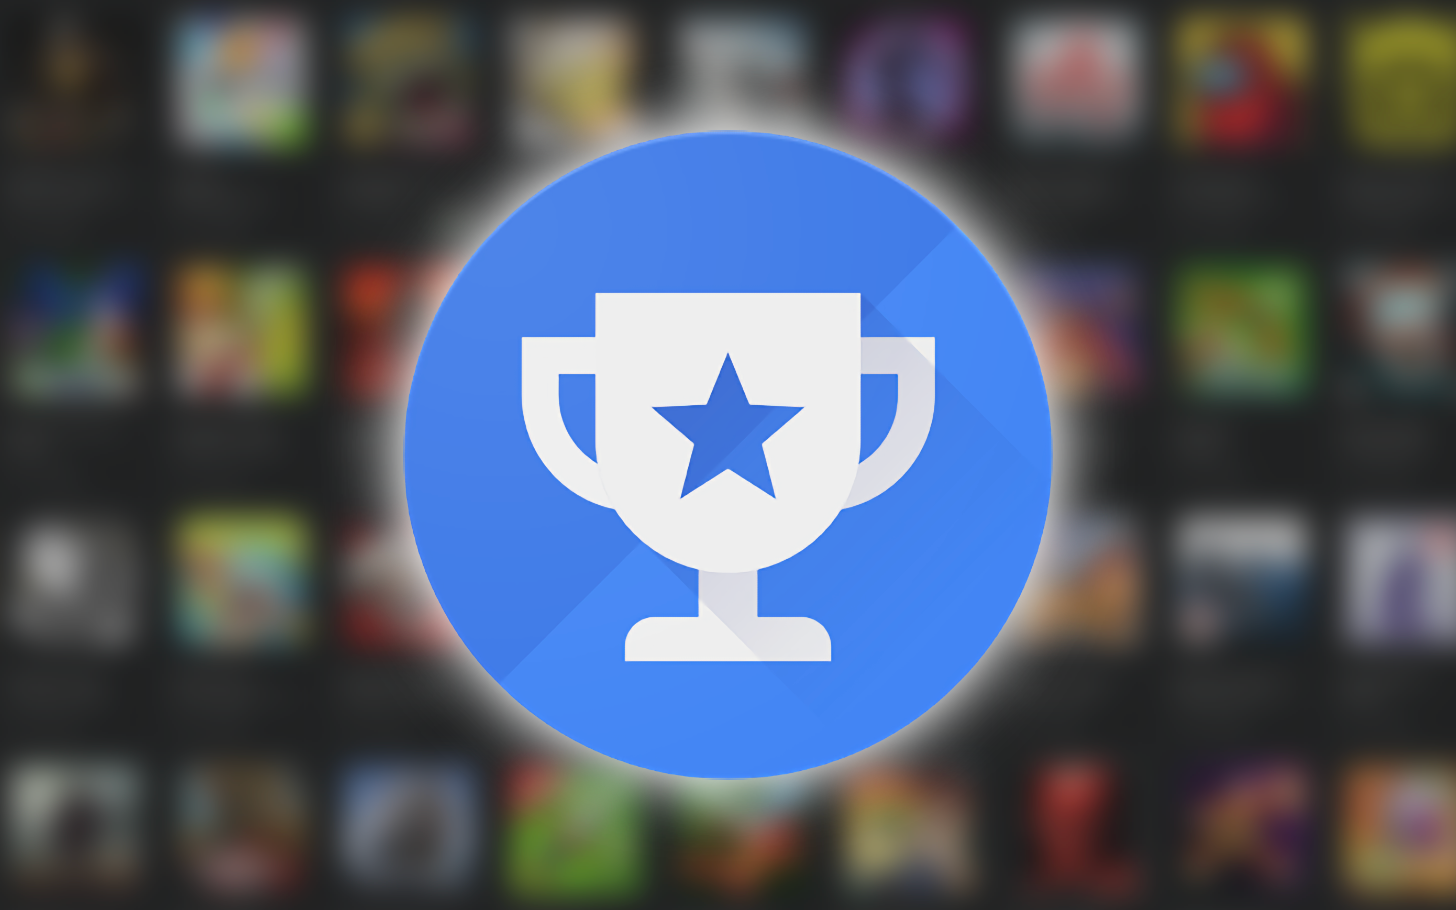 Google Opinion Rewards gets a new background location onboarding UI